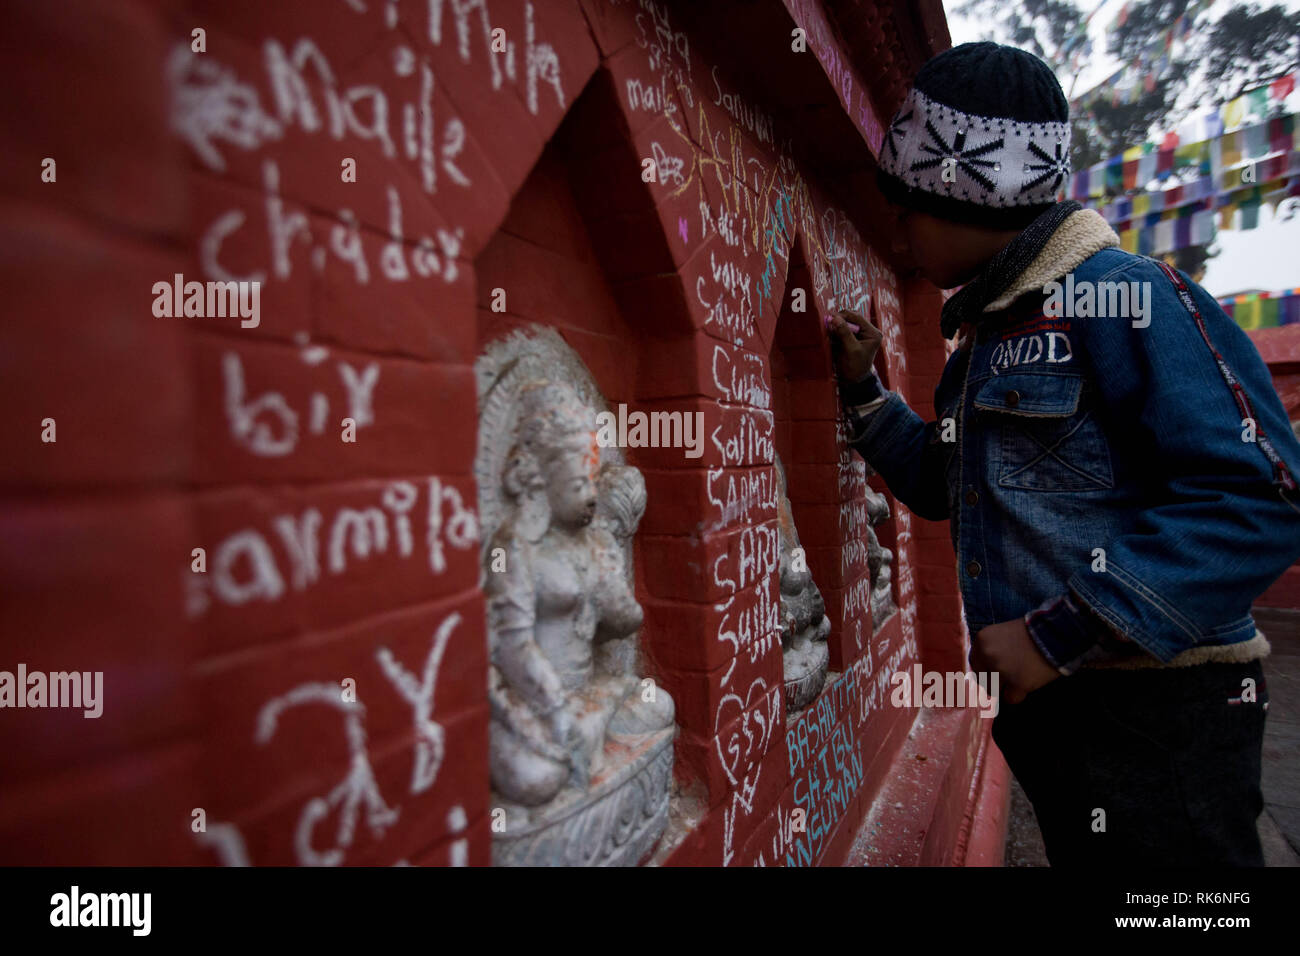 Kathmandu, Nepal. 10th Feb, 2019. A student writes on a wall at Saraswati Temple during Basanta Panchami early morning in Kathmandu, Nepal, on Feb. 10, 2019. Saraswati, Goddess of Knowledge, is worshipped on this day by the students. Credit: Sulav Shrestha/Xinhua/Alamy Live News Stock Photo